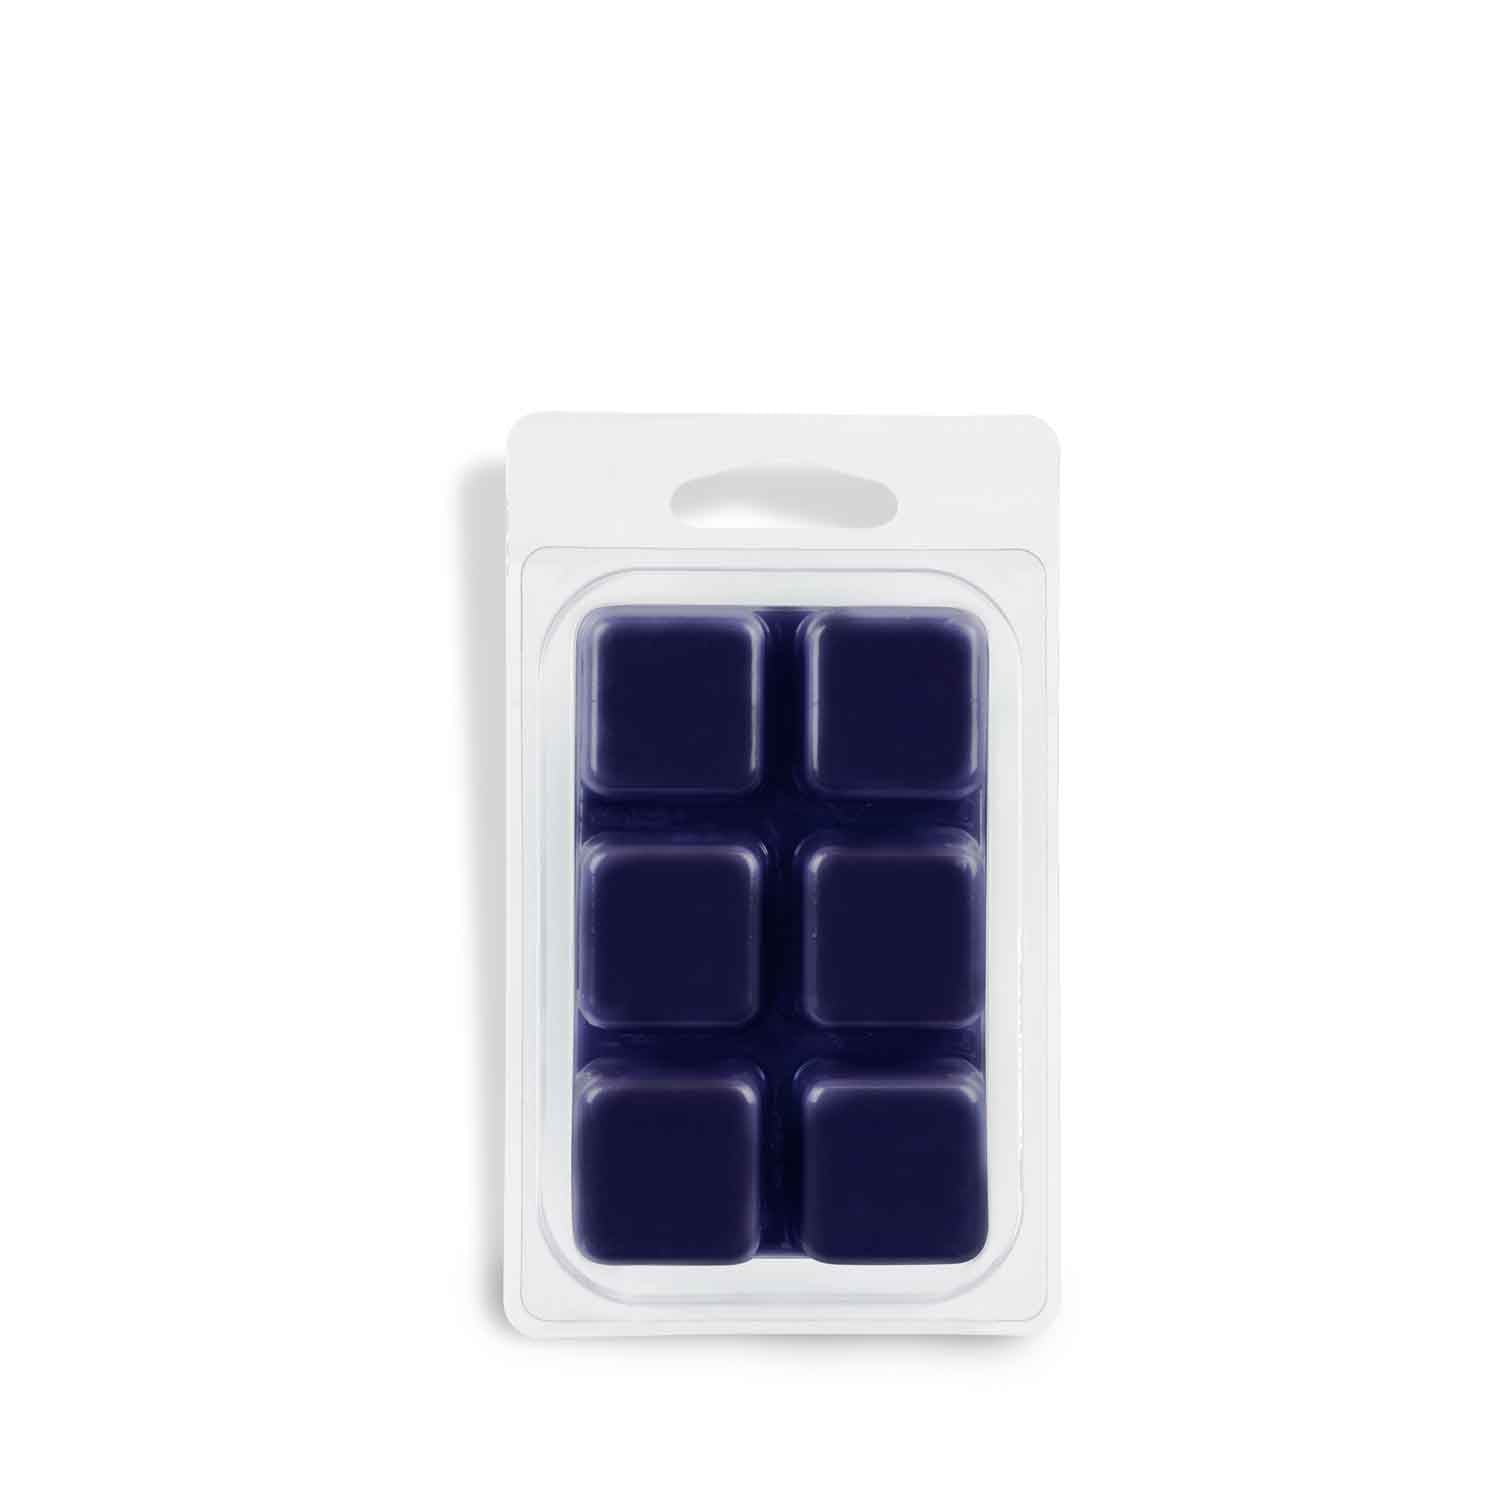 A package of Blueberry Muffin Scented Wax Melt (2.5 oz) Tuscany Candle®.